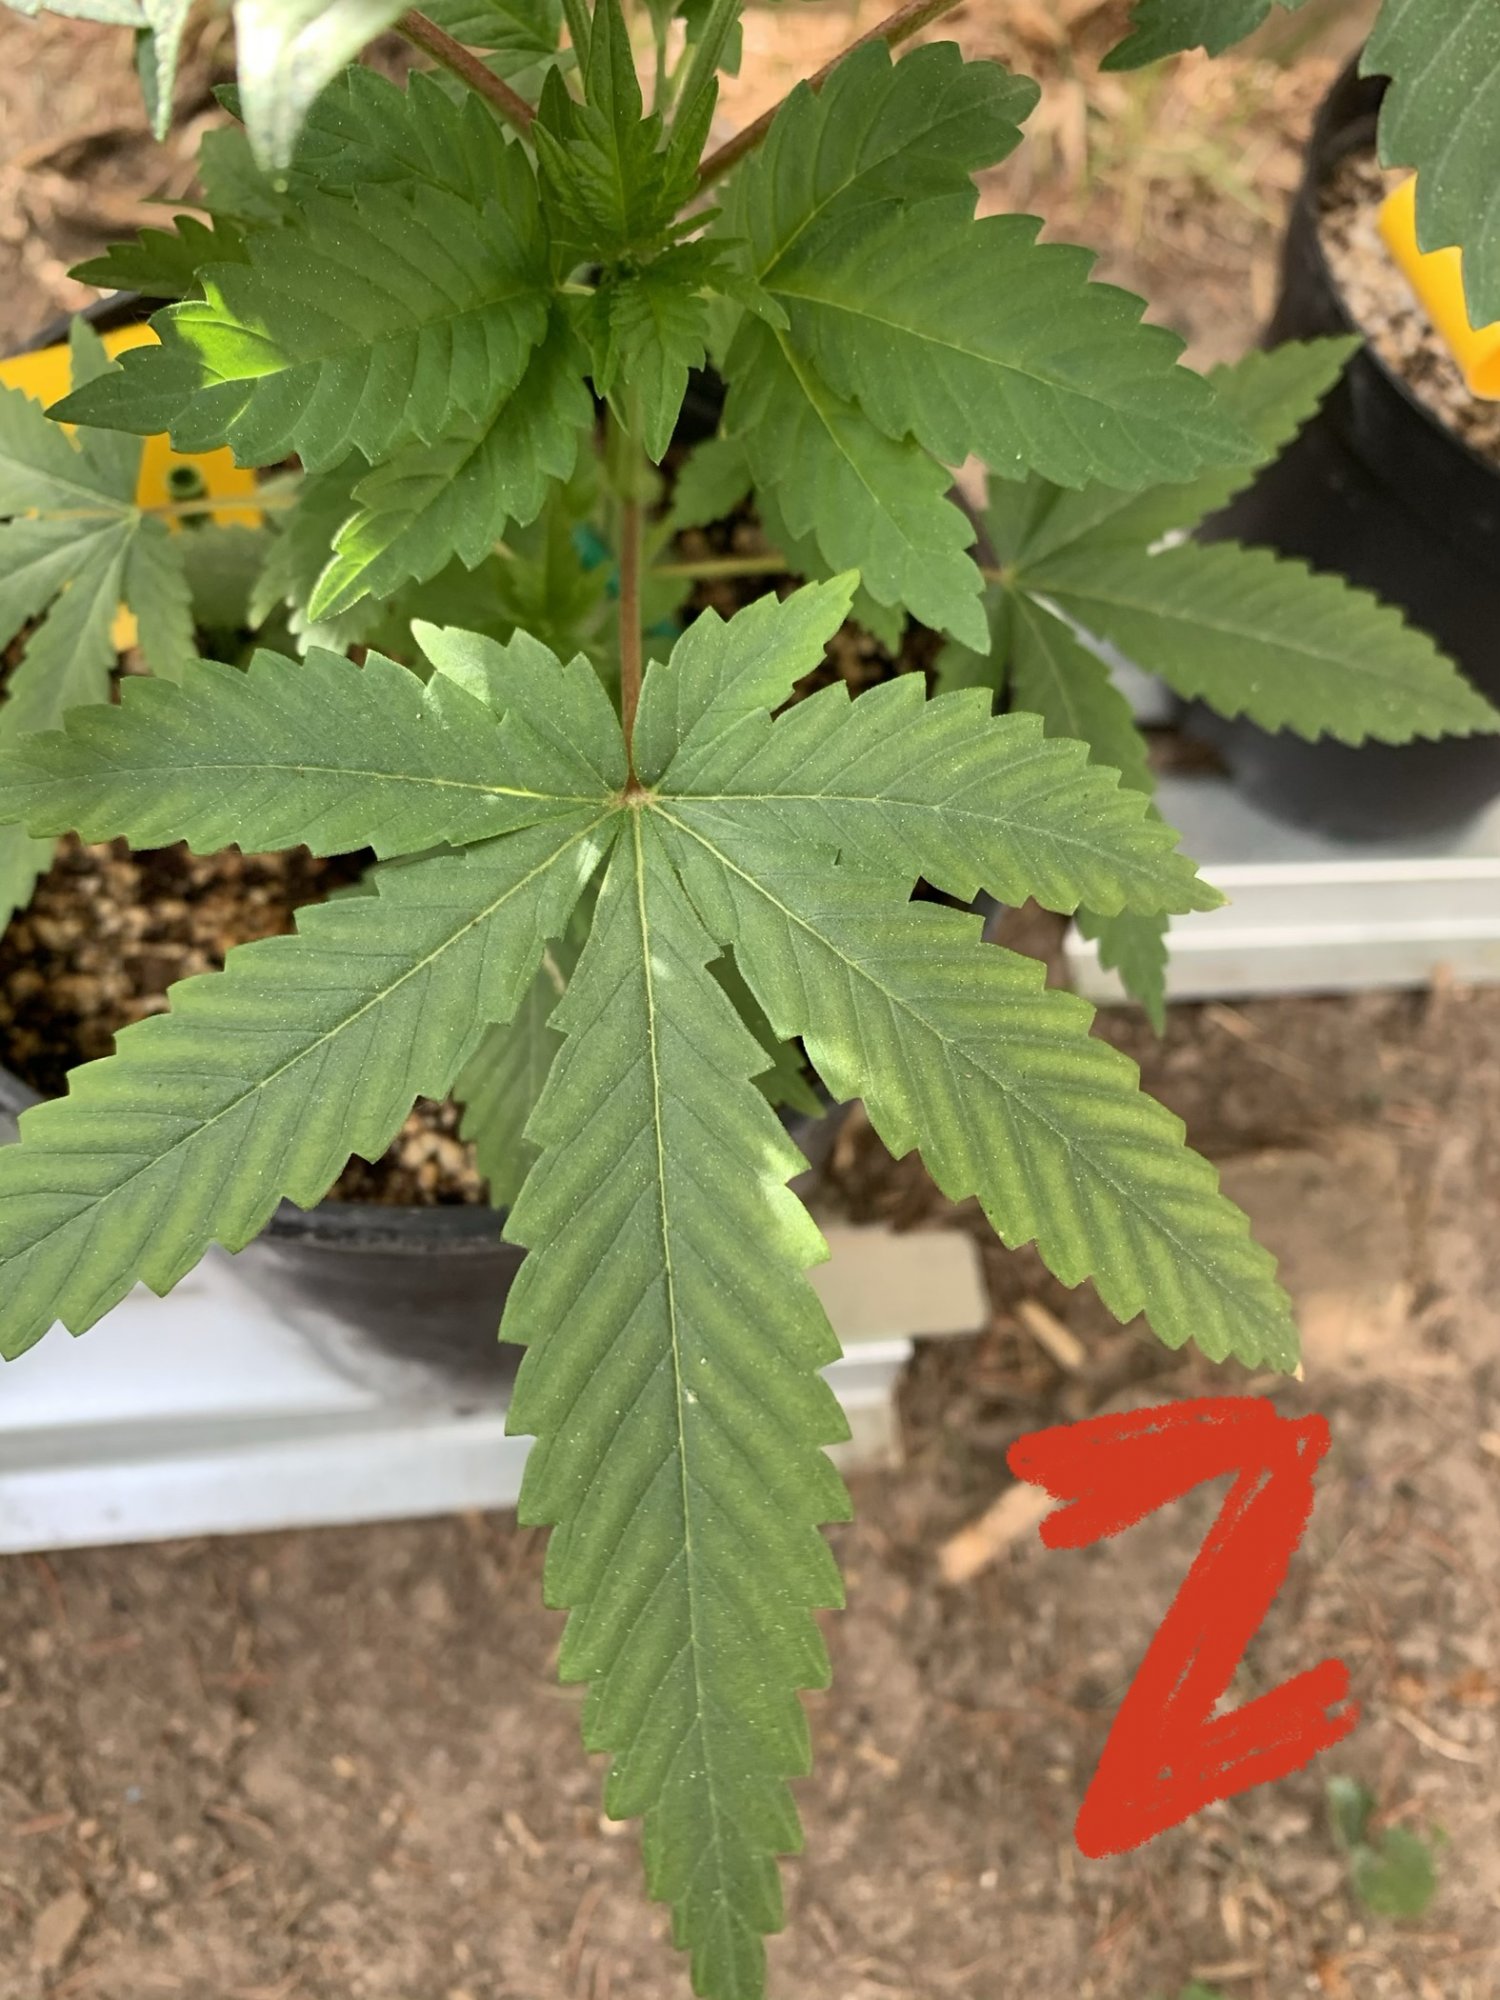 The game guess that deficiency 2